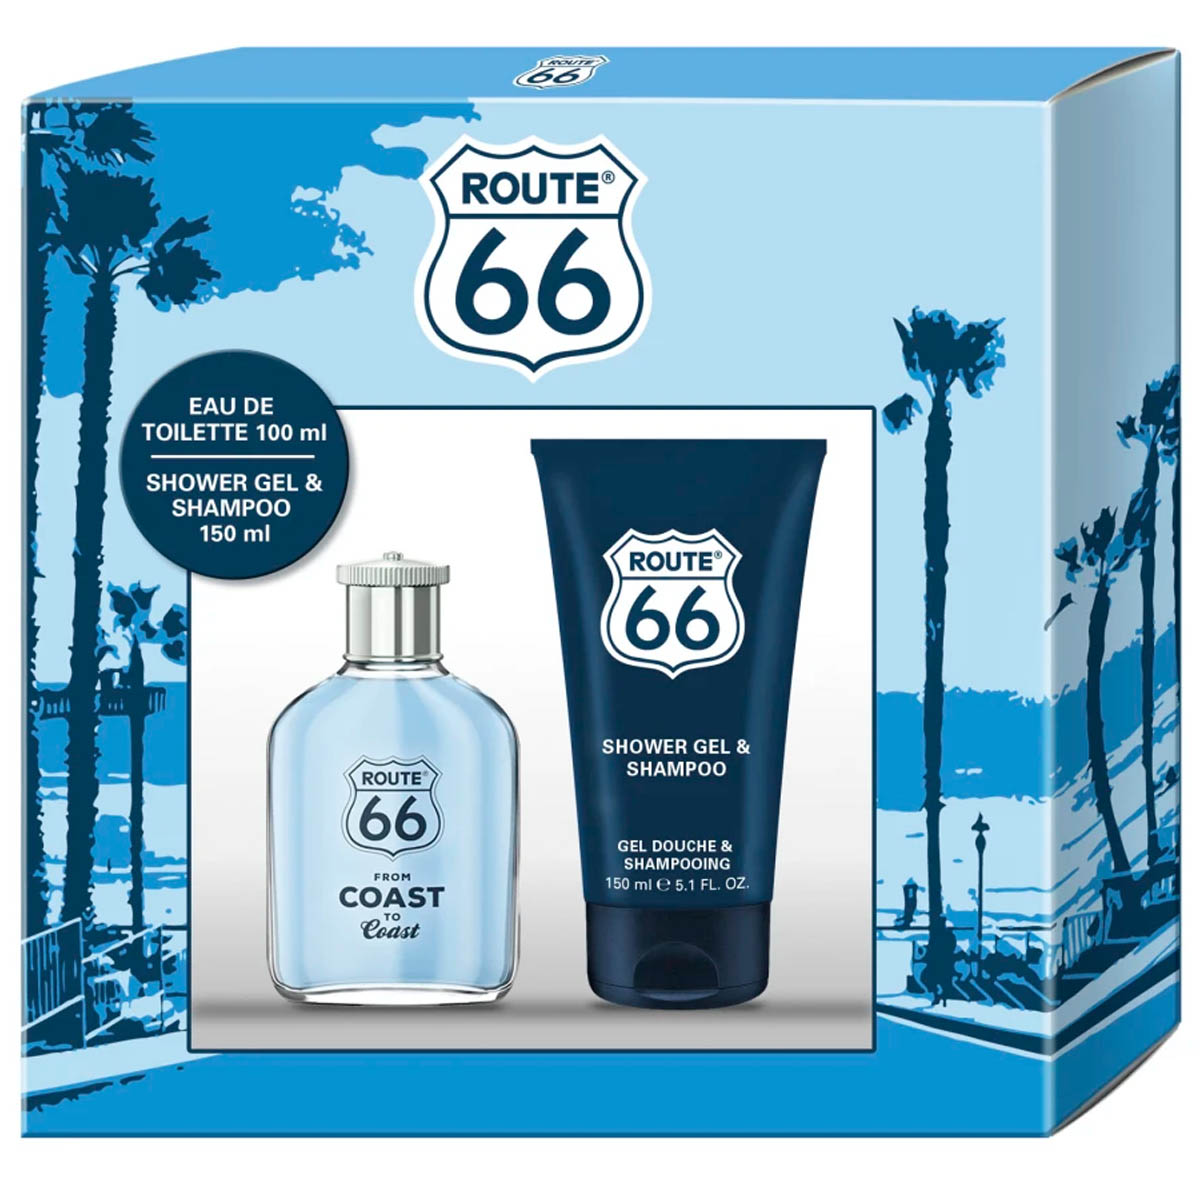 Route 66 From Coast gift set